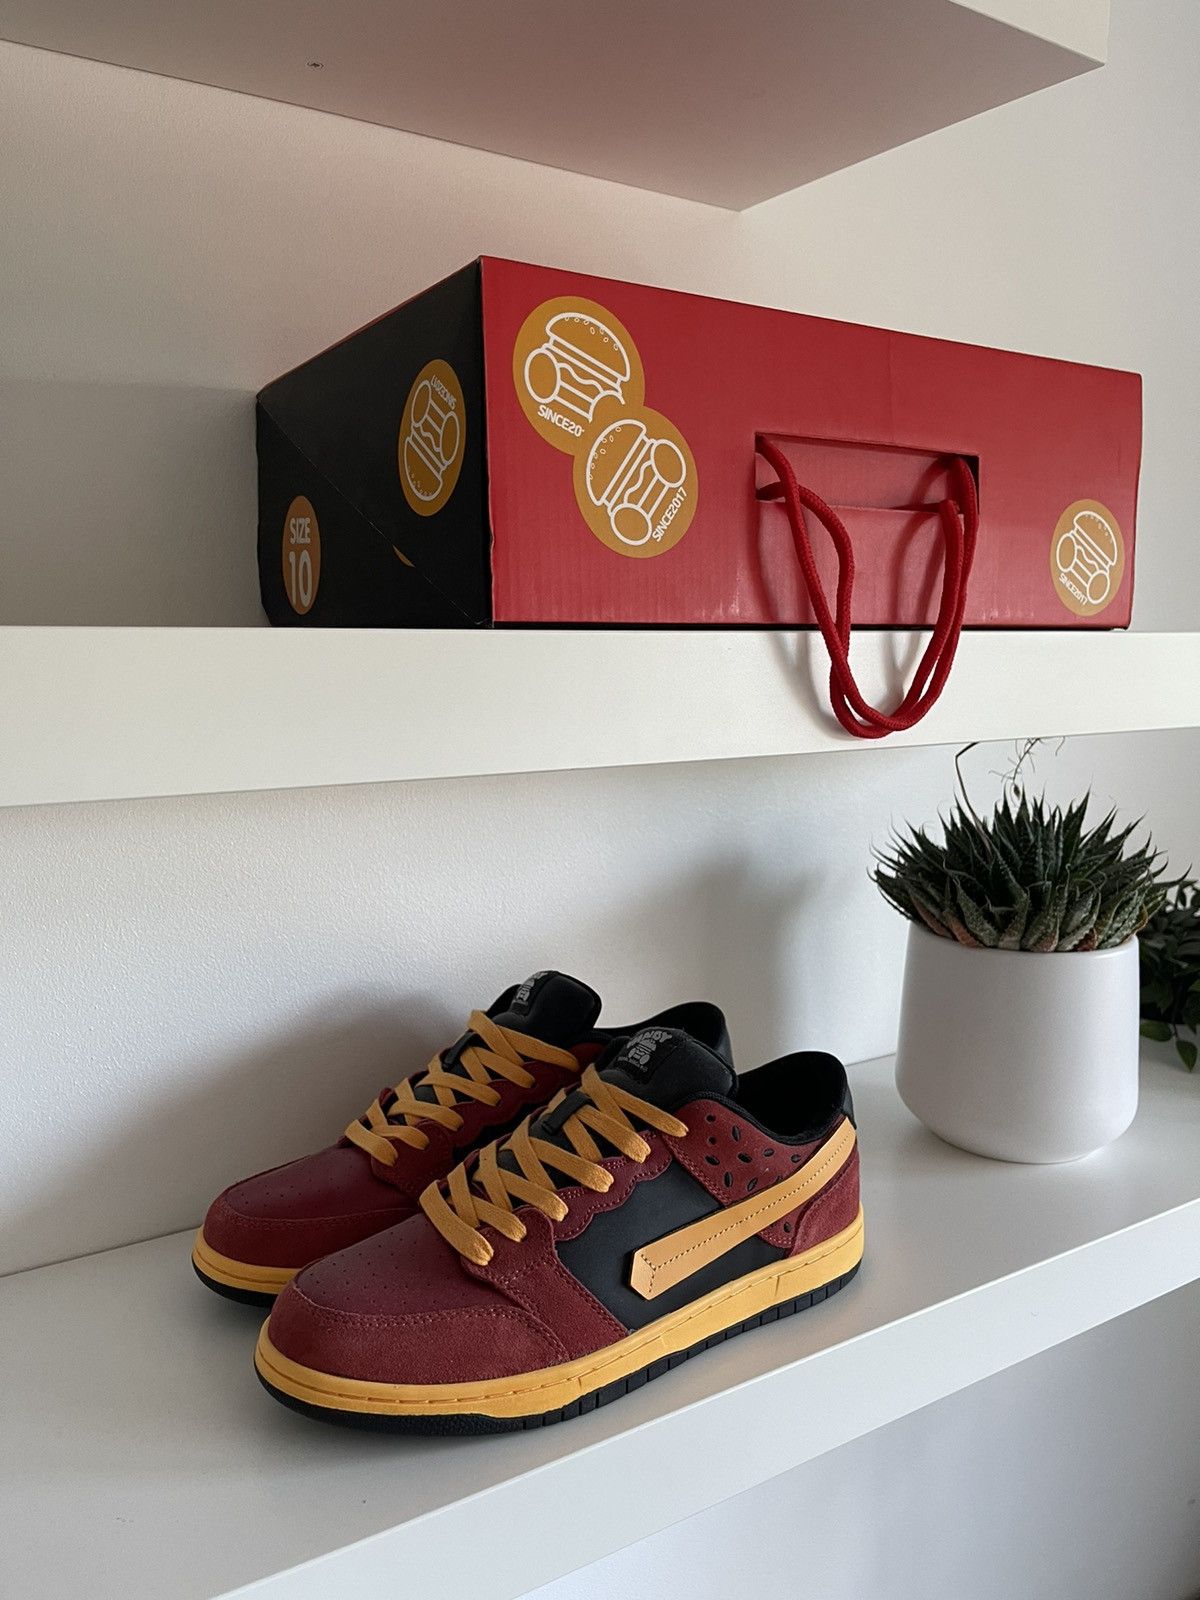 Vandy The Pink Vandy The Pink 'Spicy Burger' Dunk Low | Grailed